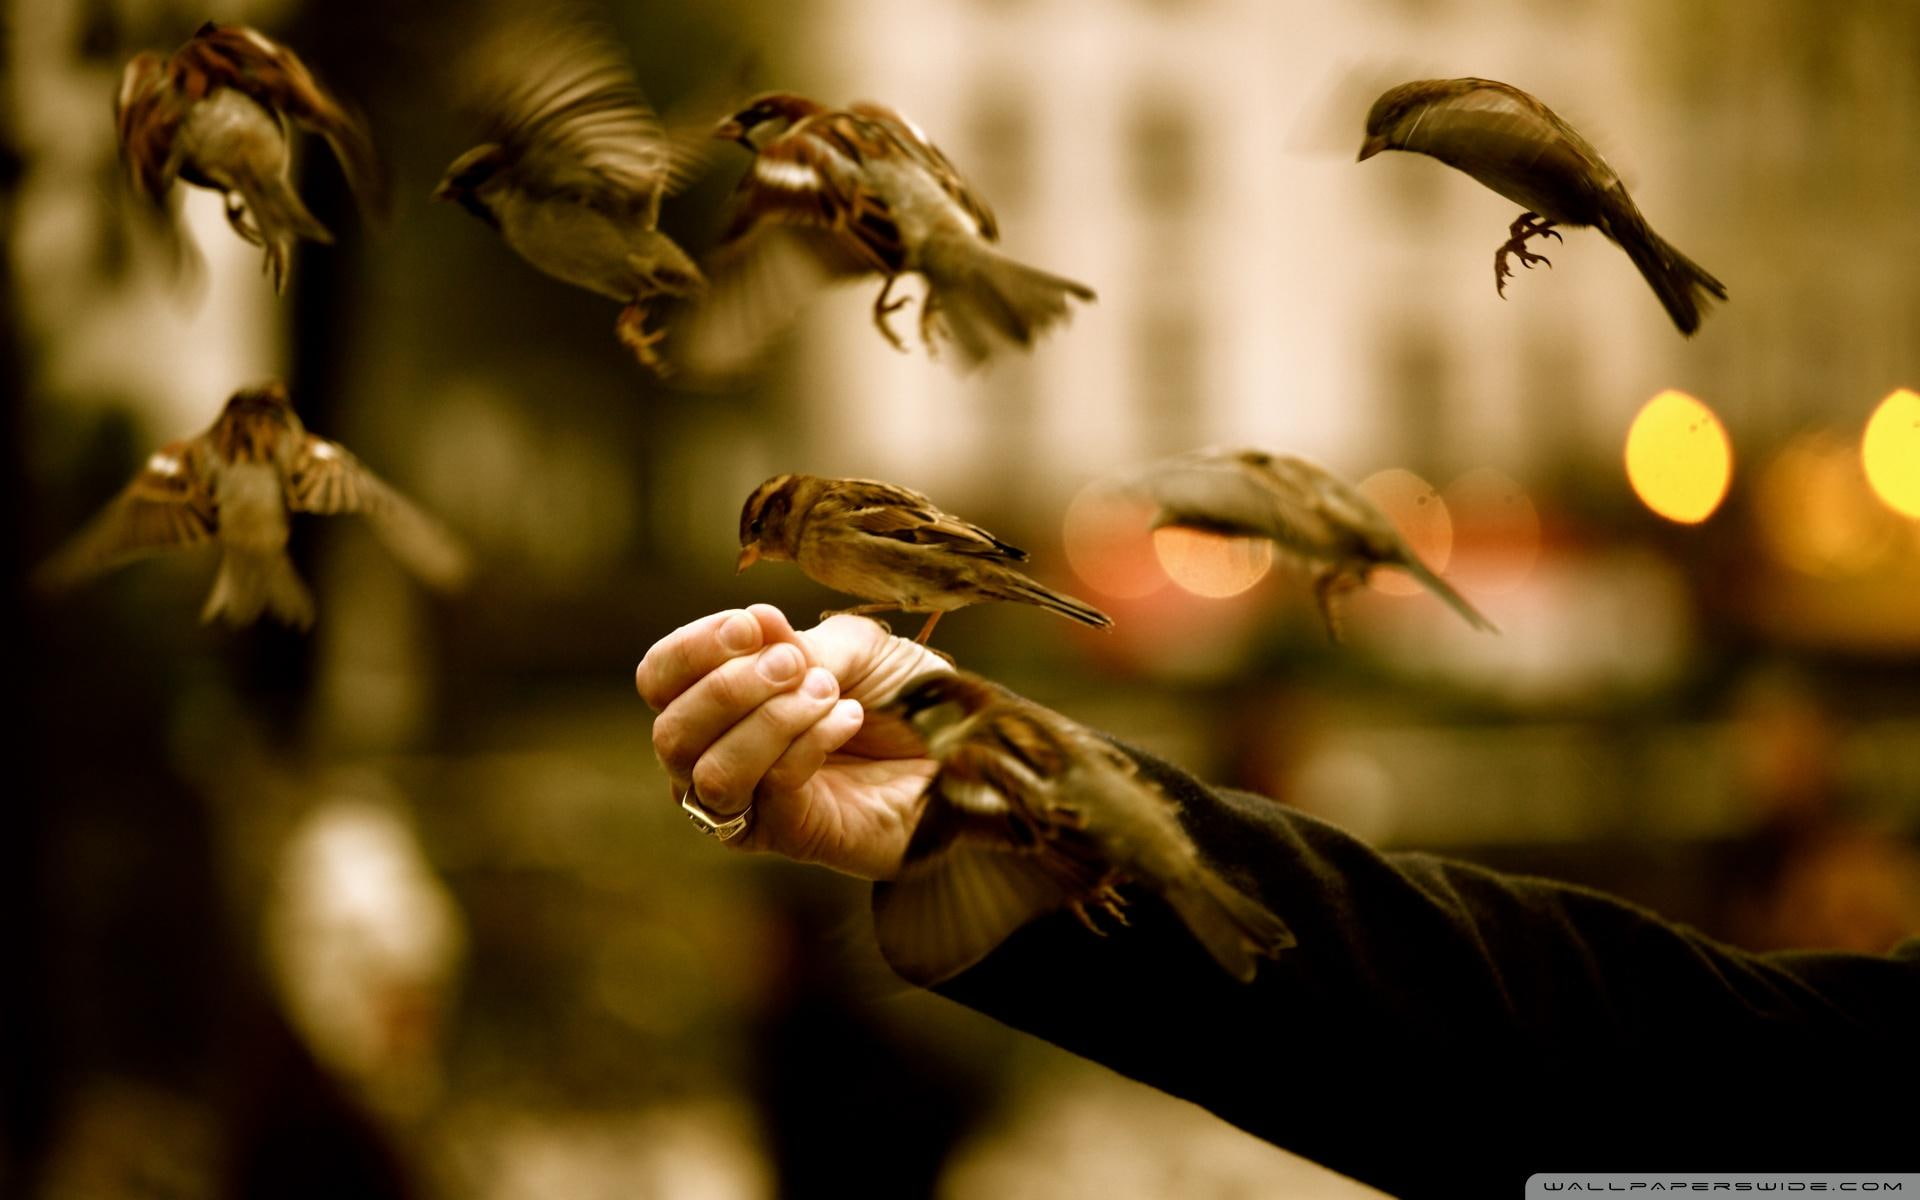 Feeding Sparrows, hand, flock, moment, feathers, birds, photography